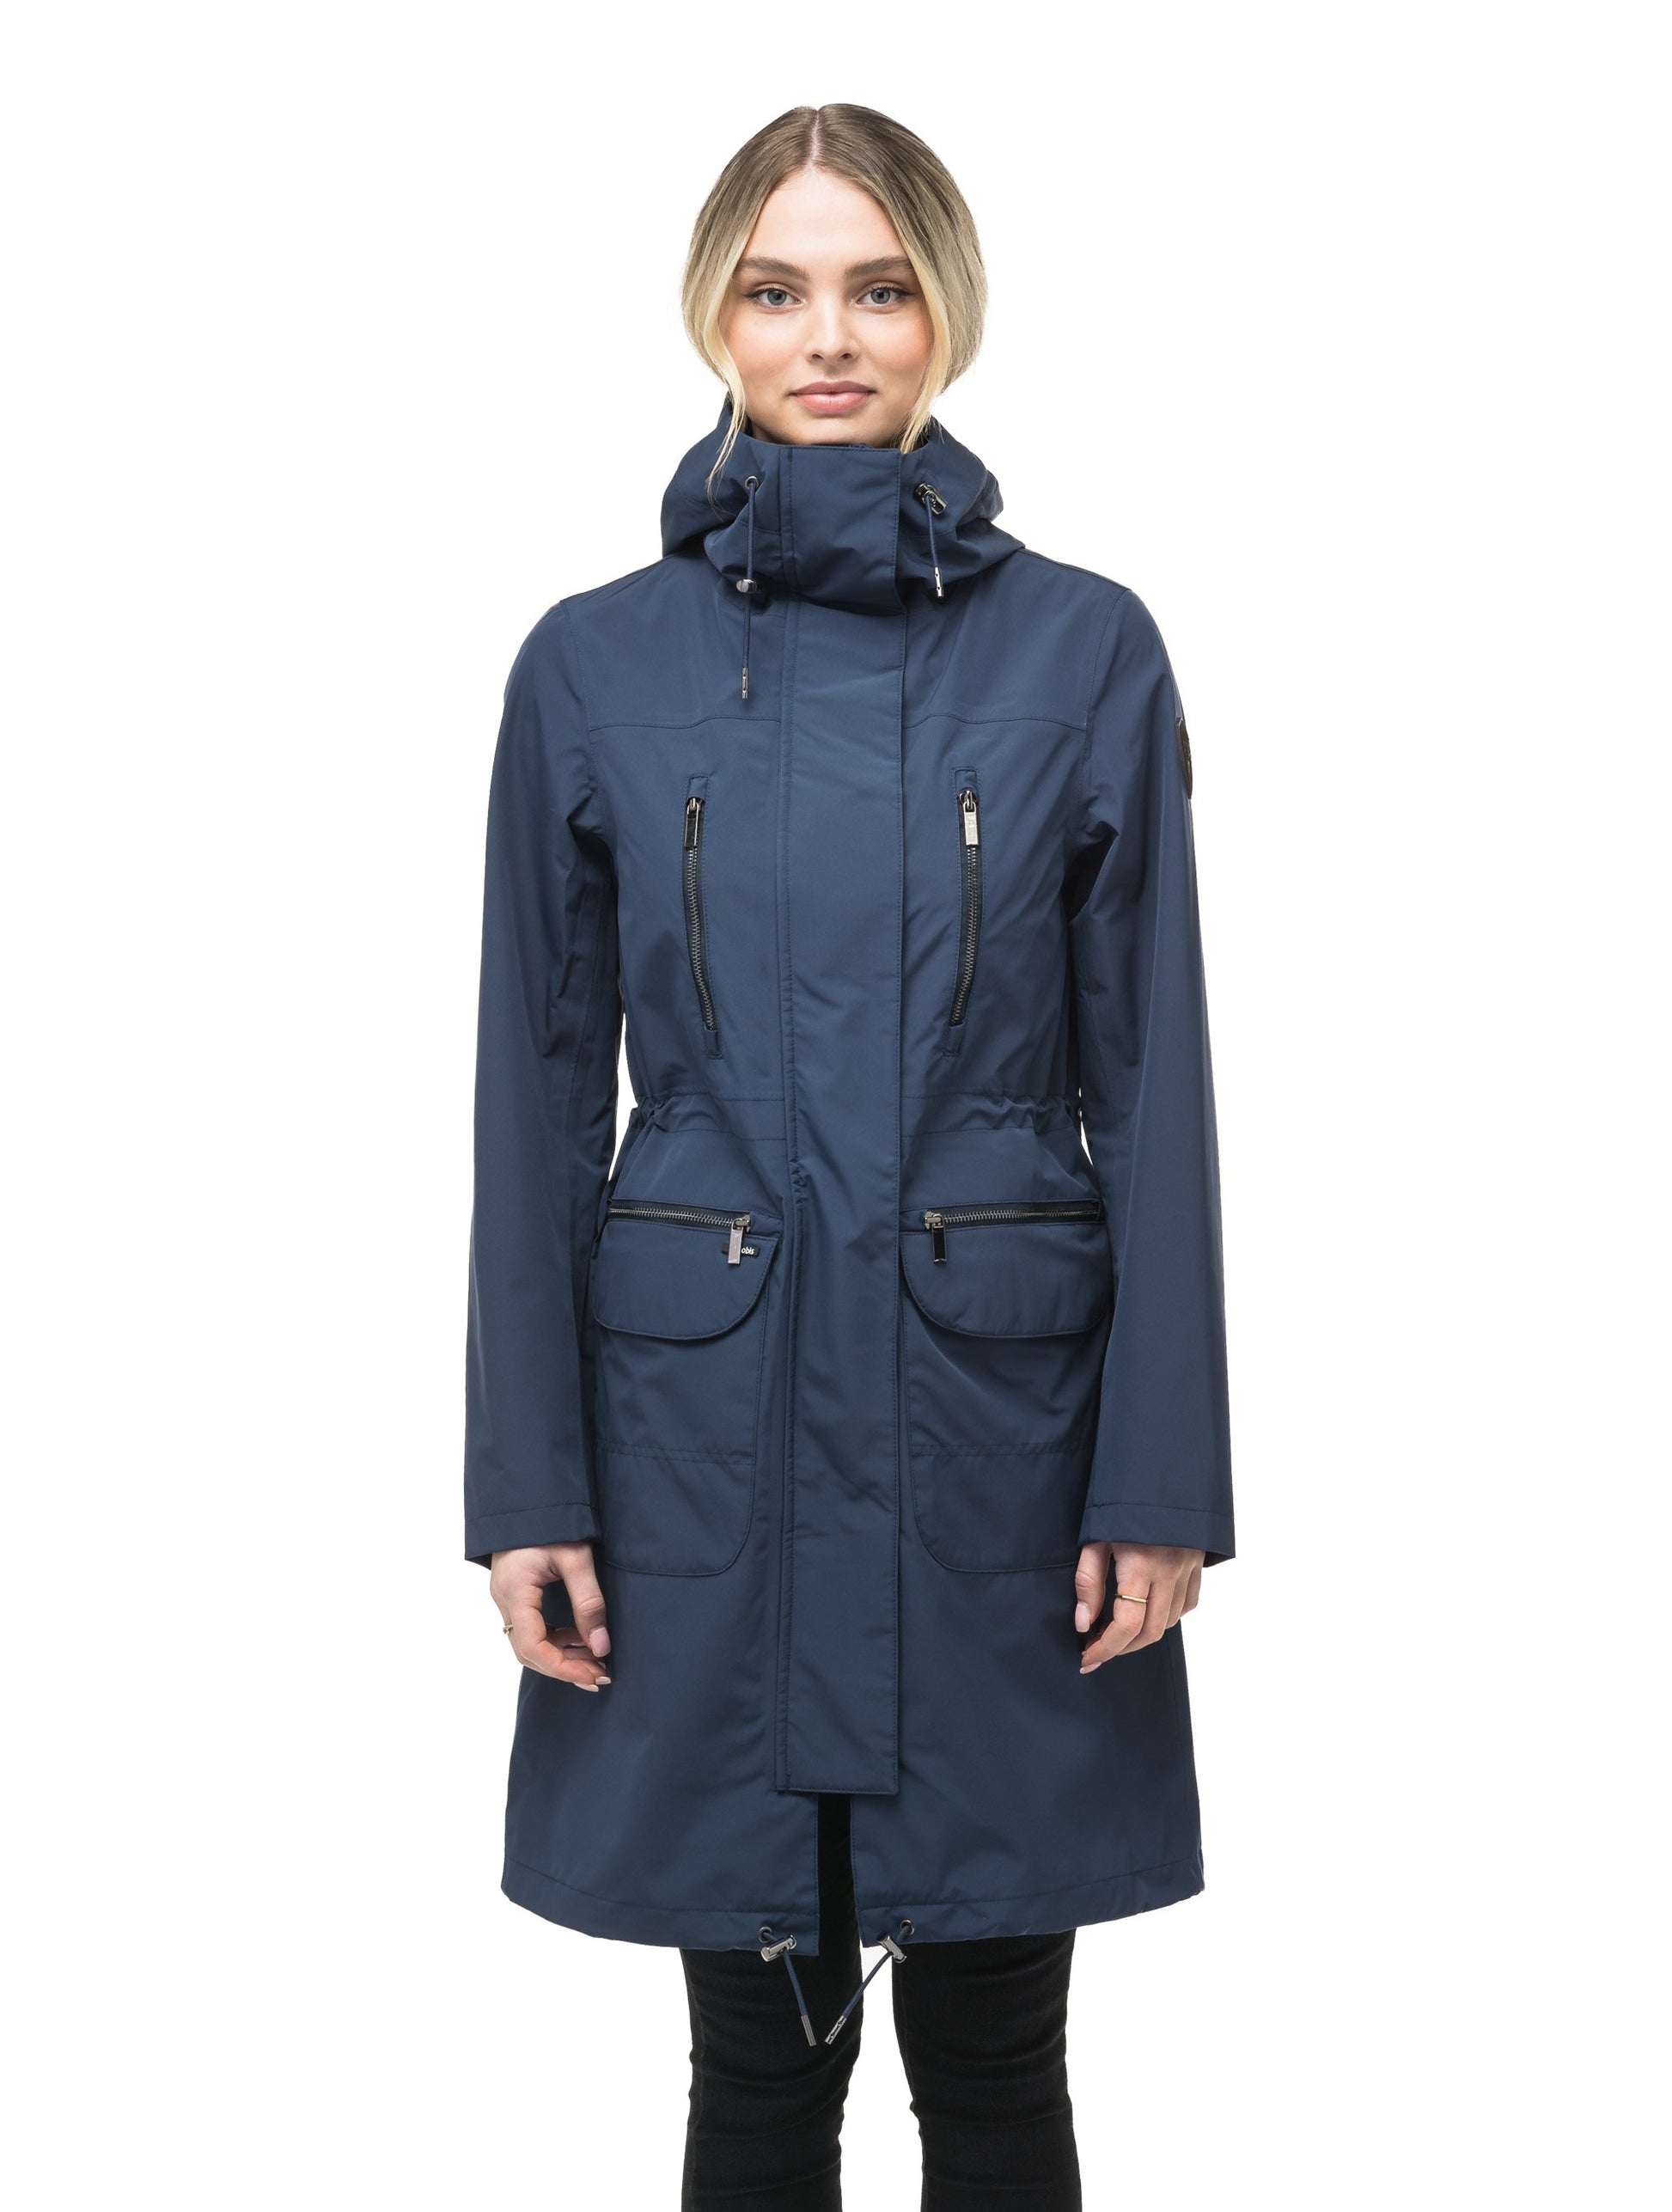 Women's knee length anorak with four front pockets and adjustable cord waist in Marine